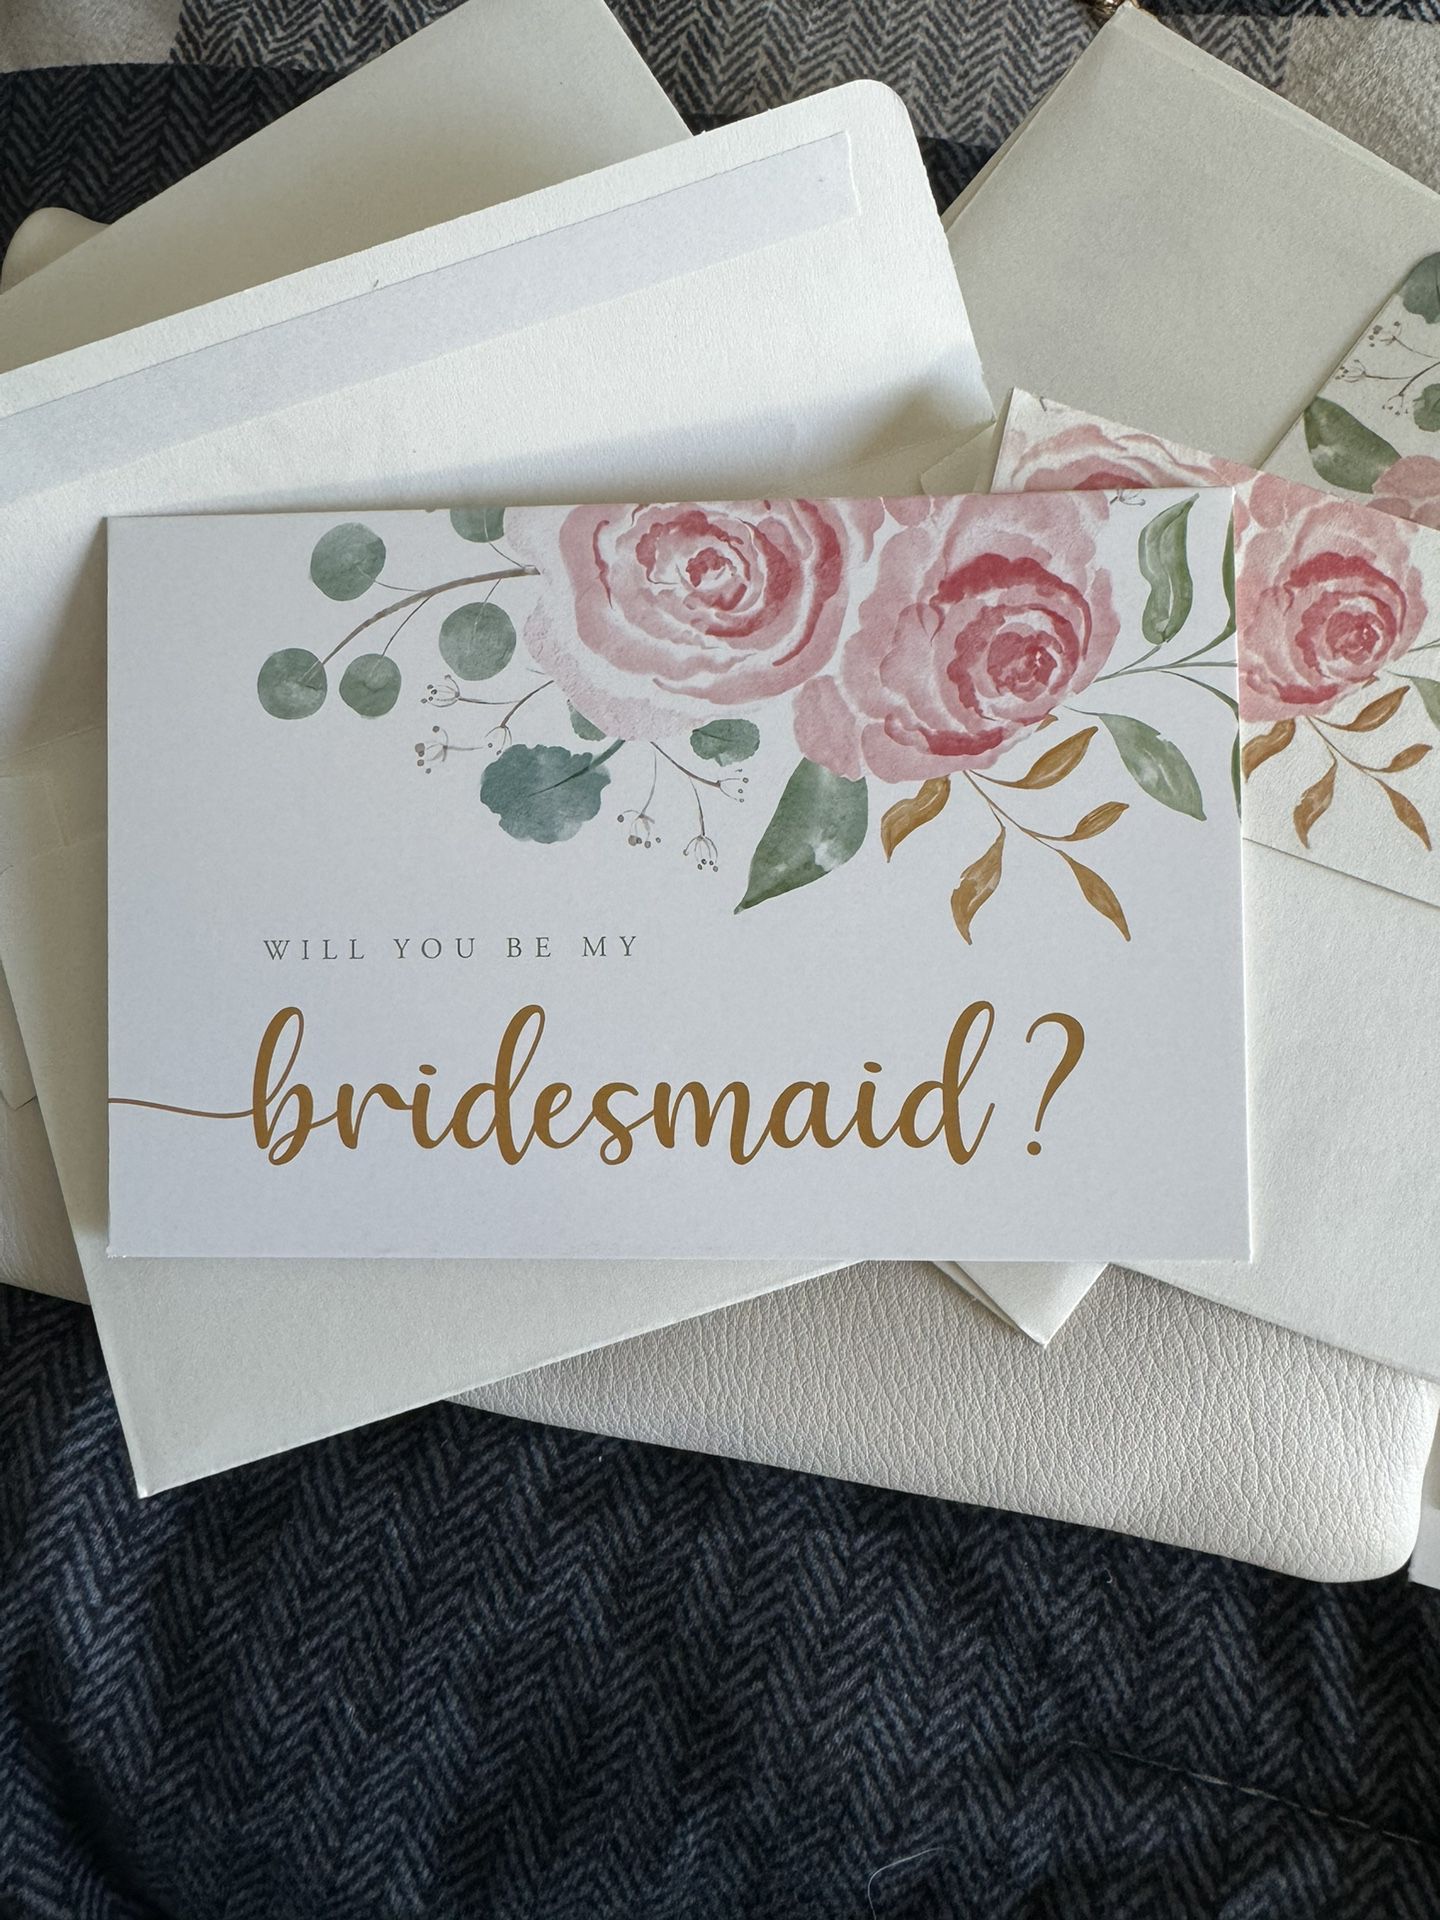 7 Bridesmaids Proposal Cards With Envelopes ( Moving)